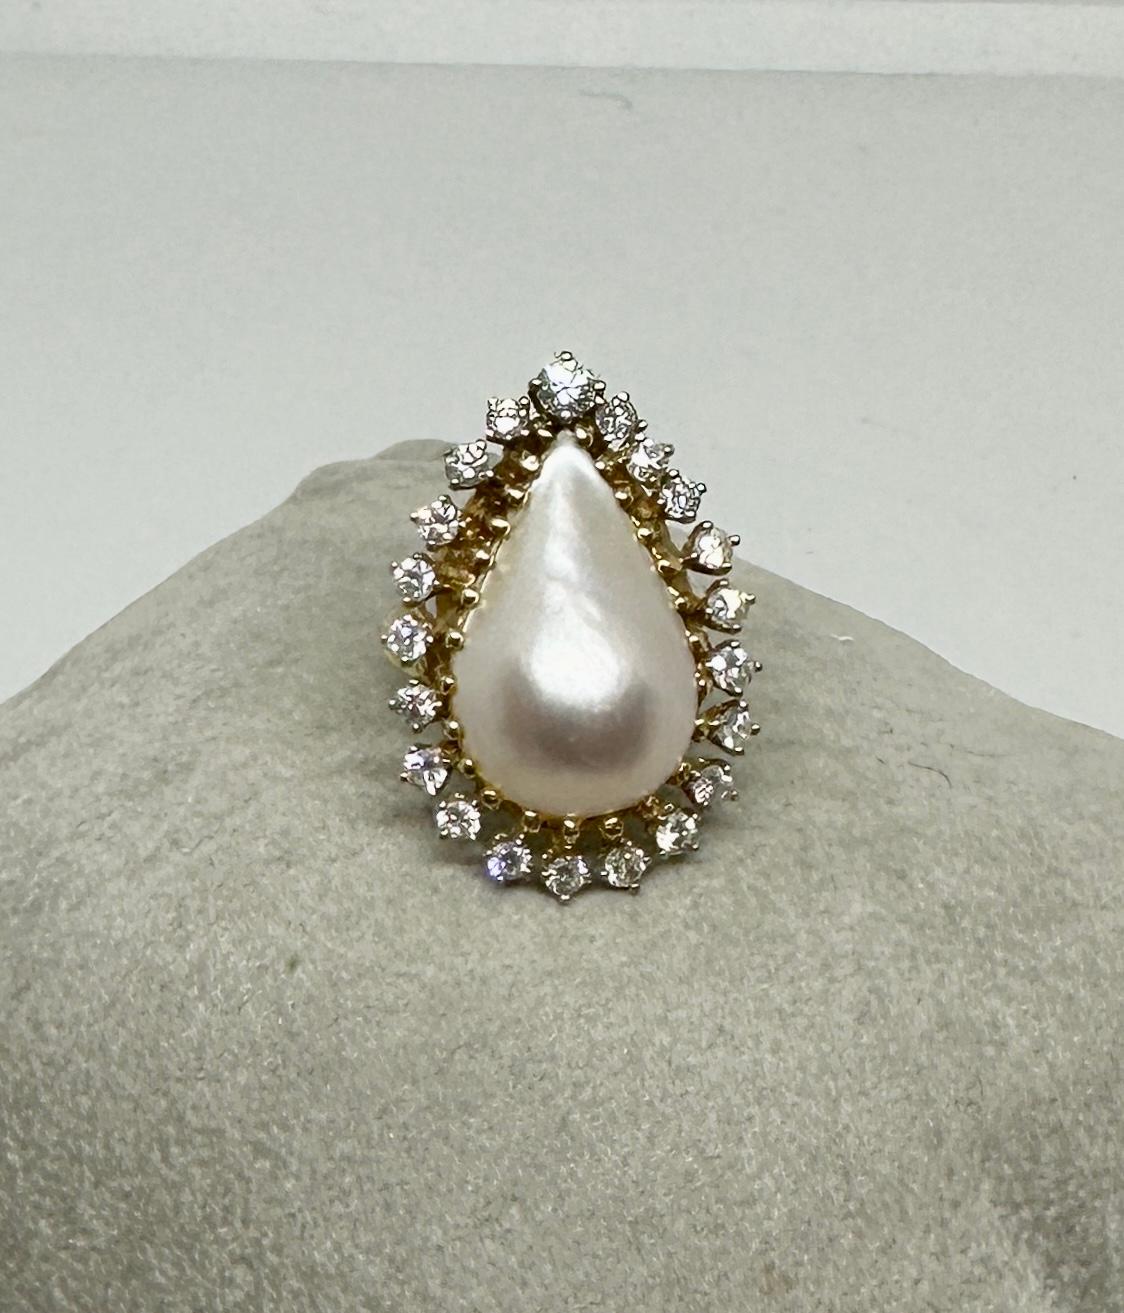 Mabe Pearl 2 Carat 21 Diamond Halo Ring 14 Karat Gold Retro Midcentury Modern In Excellent Condition For Sale In New York, NY